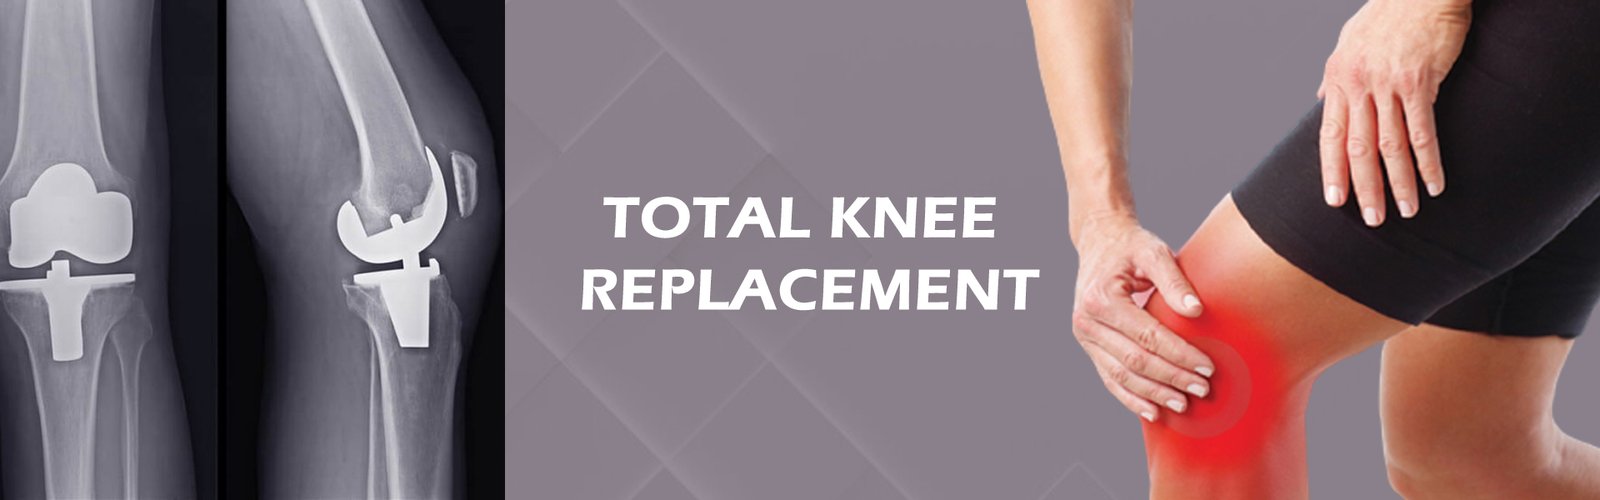 Total knee replacemennt copy11